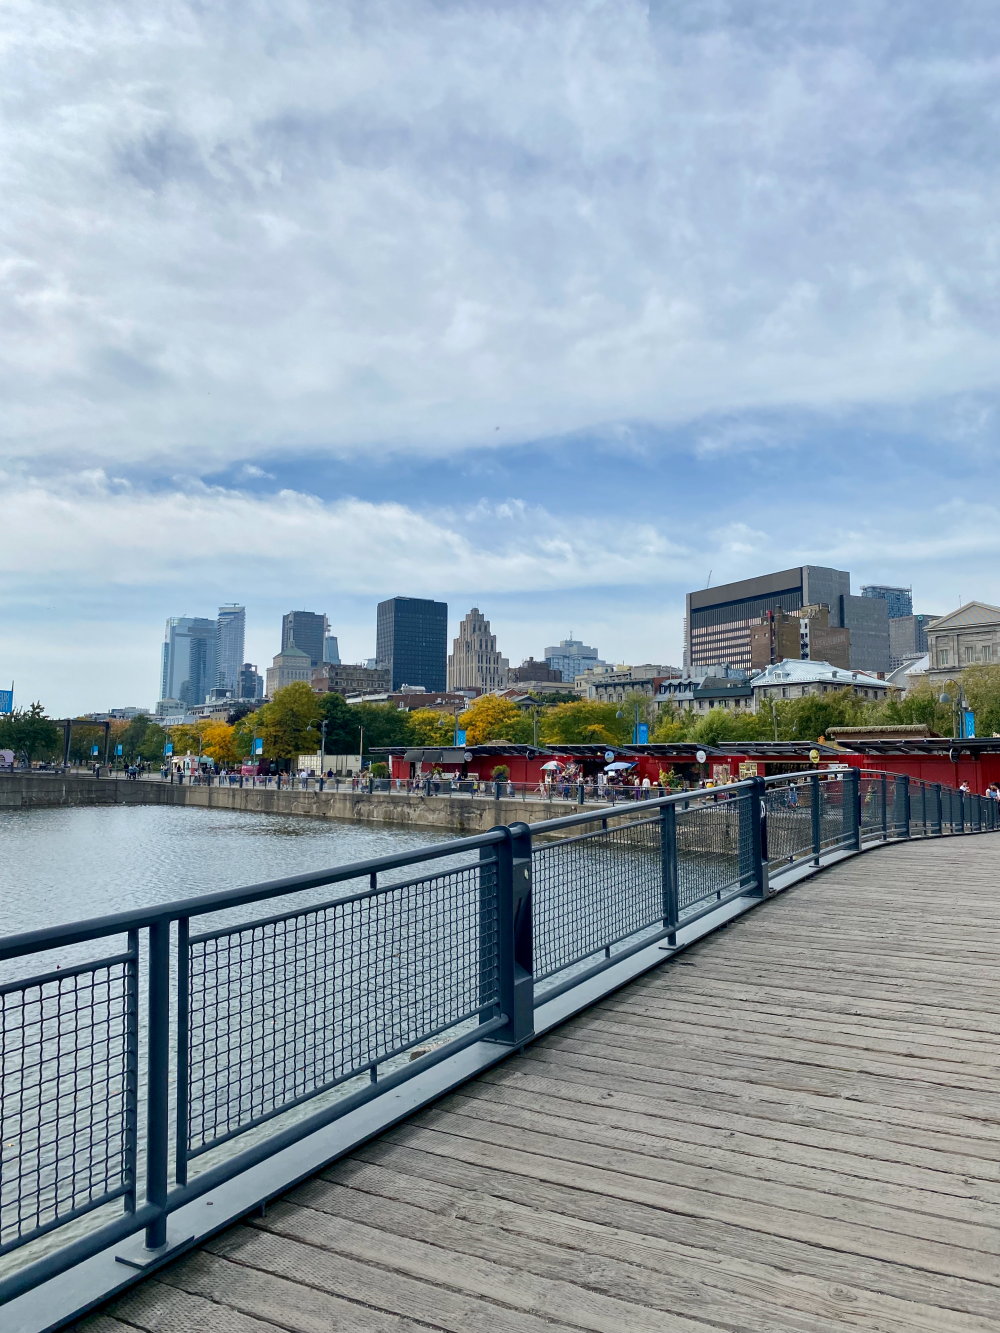 Looking back at Montréal from the port area